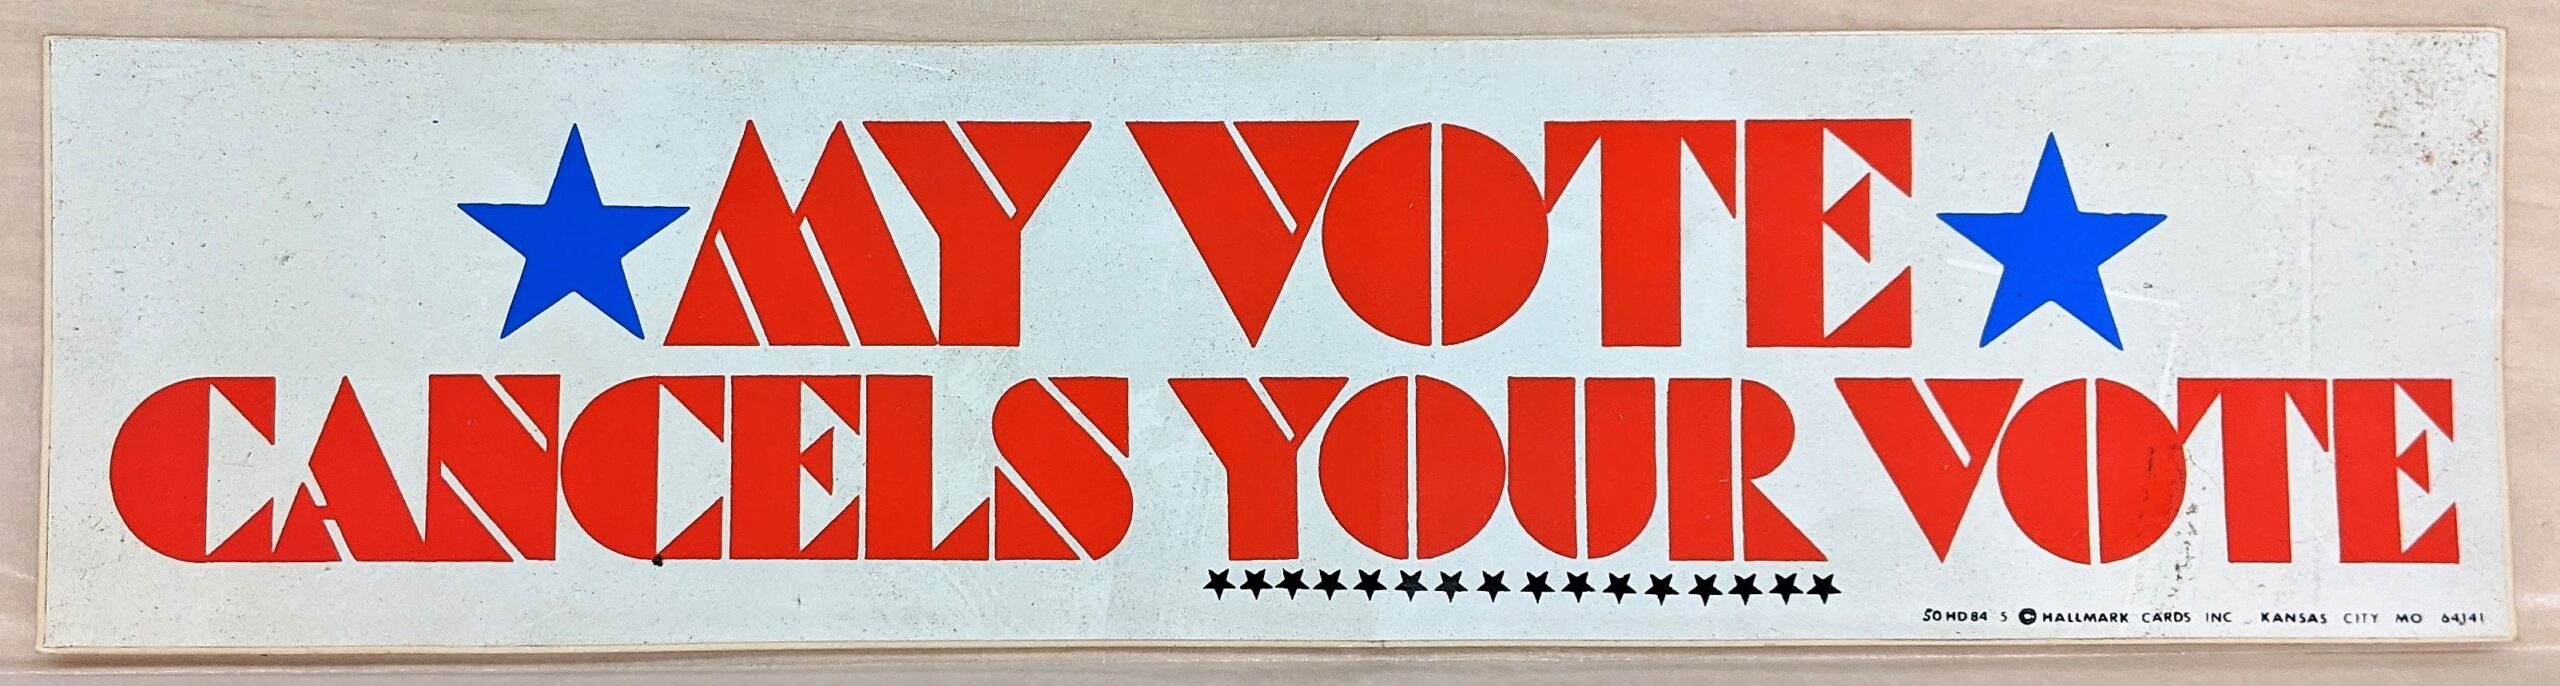 Creator unknown, “My Vote Cancels Your Vote” bumper sticker, from the Jerome O. Herlihy political campaign ephemera collection